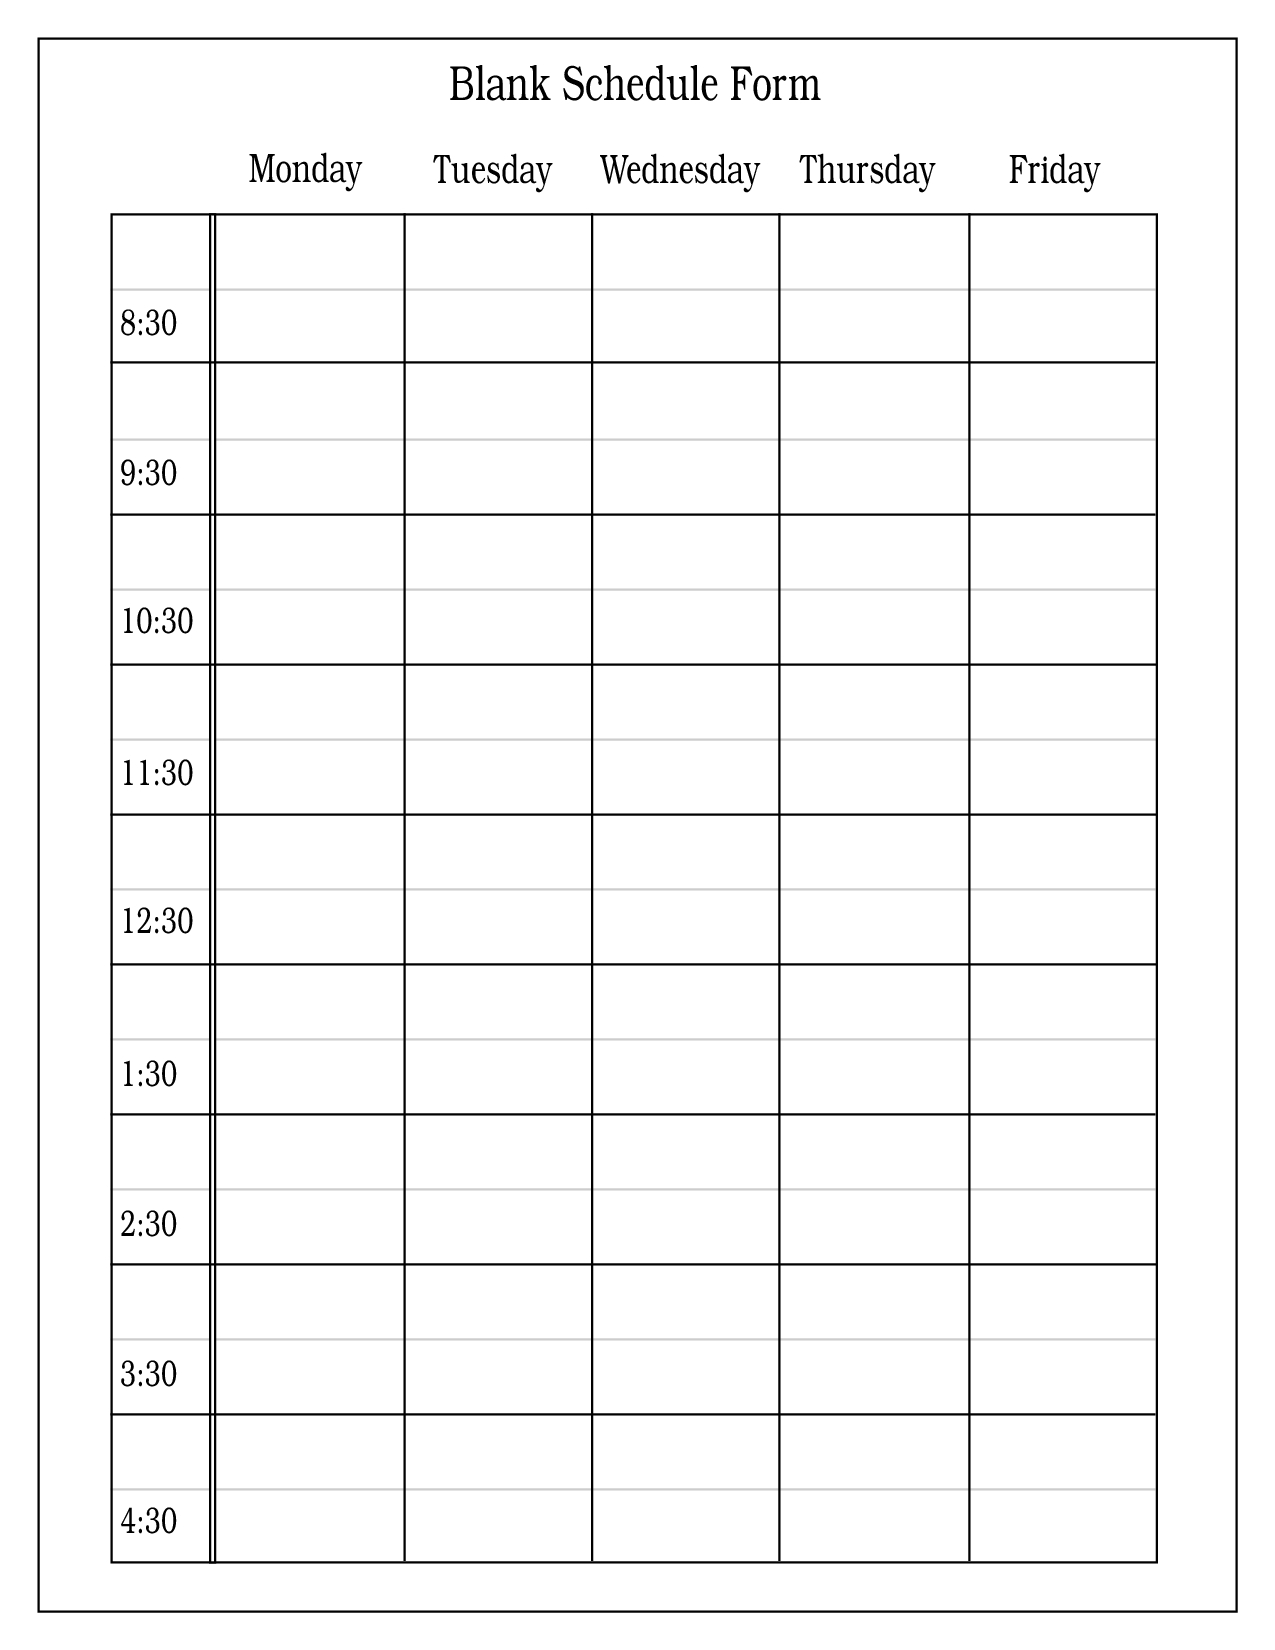 Blank Copy Of Monthly Sign Up Sheet Calendar Schedule-Monthly Calendar Sign Up Sheet